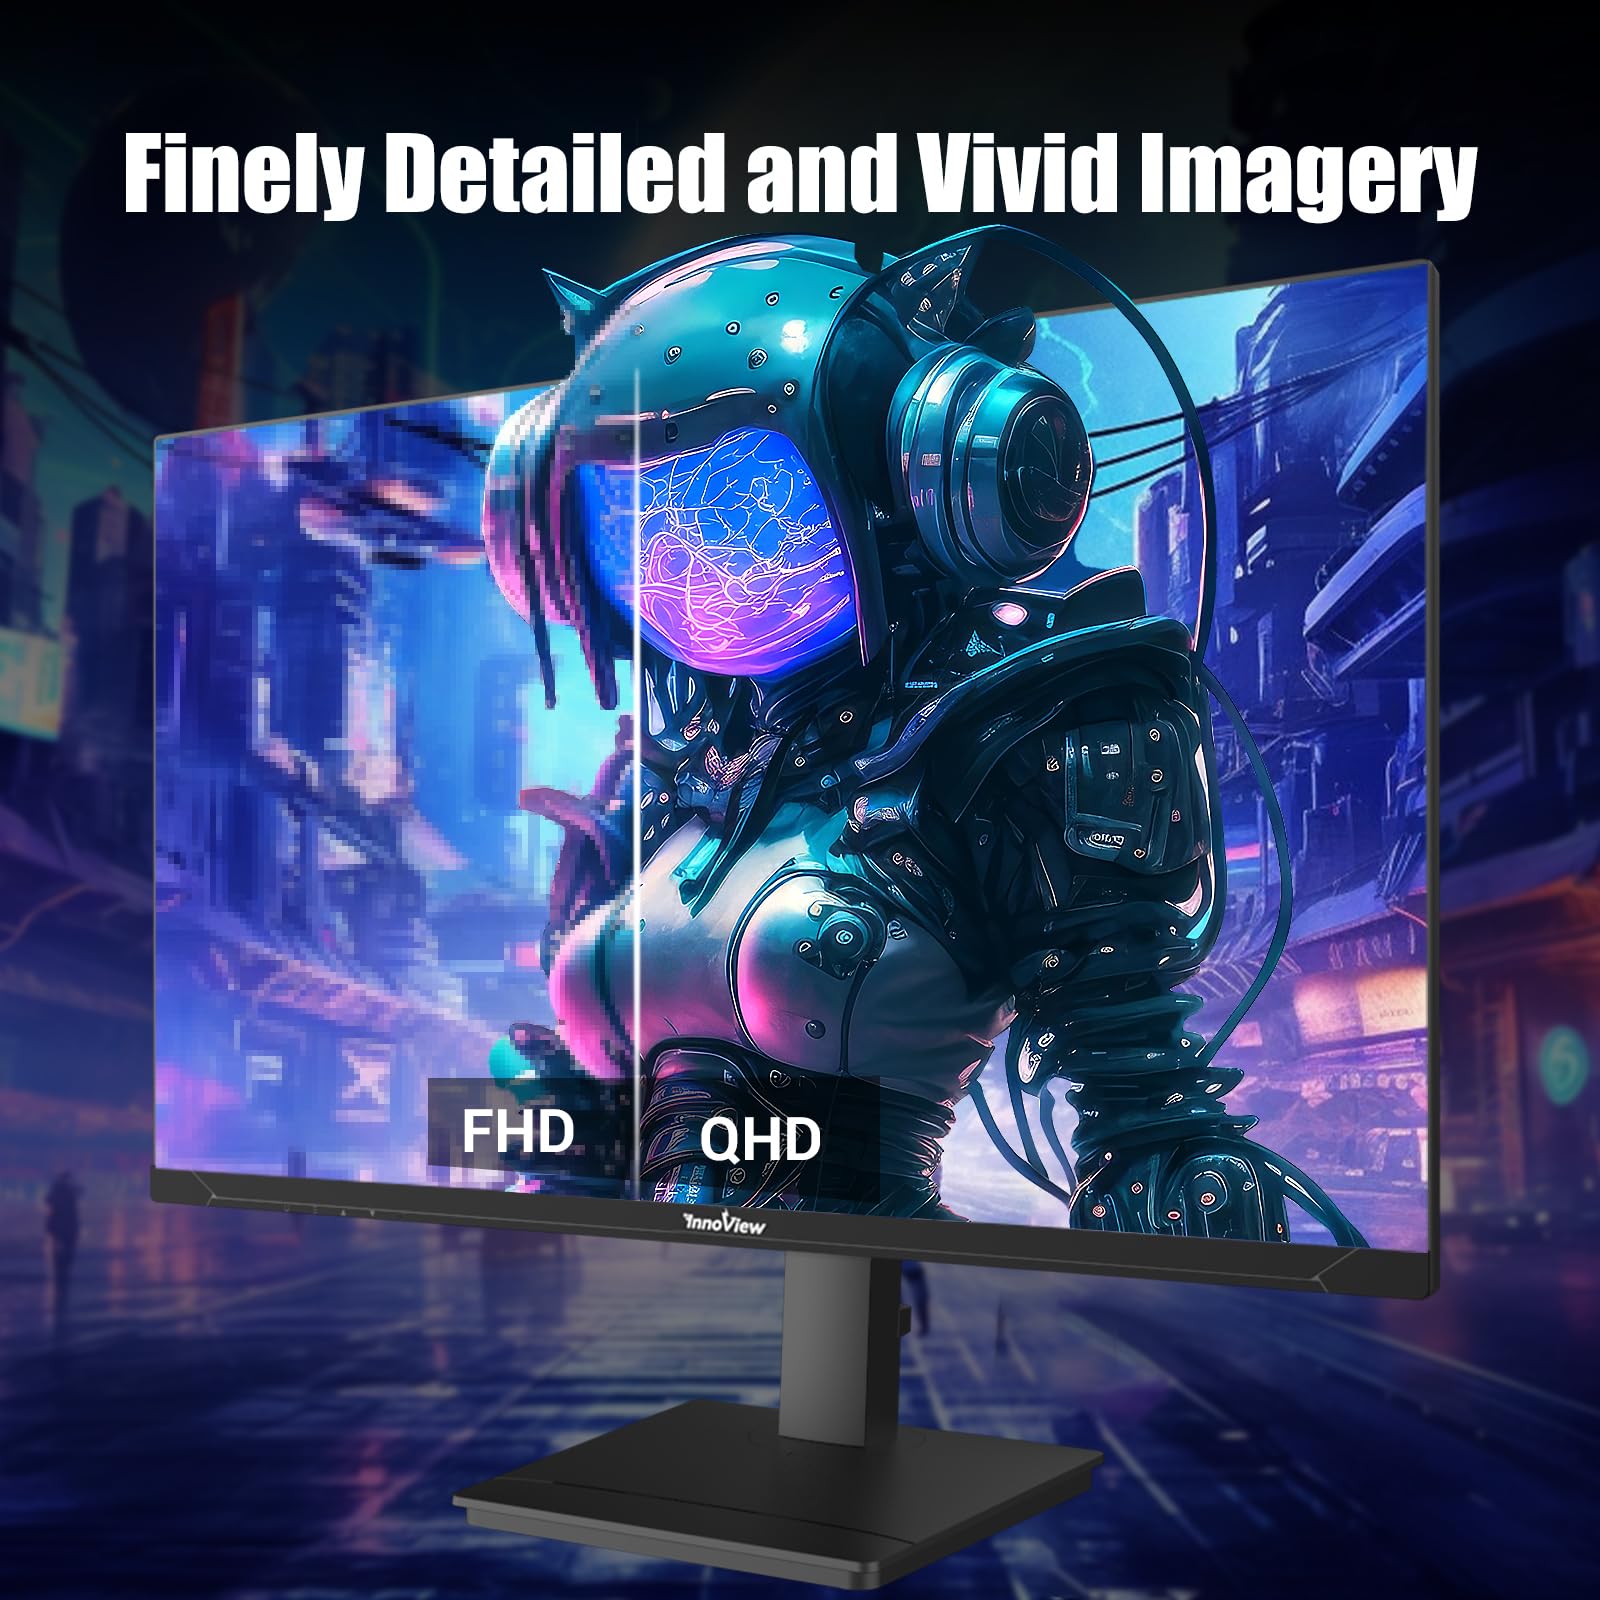 InnoView 27 Inch 240Hz QHD 1440p 1ms Gaming Monitor Height Adjustable 99% sRGB FreeSync HDR10 Eyes Care Computer PC Gamer Monitor with 3W*2 Speakers Built in DP HDMI for Game